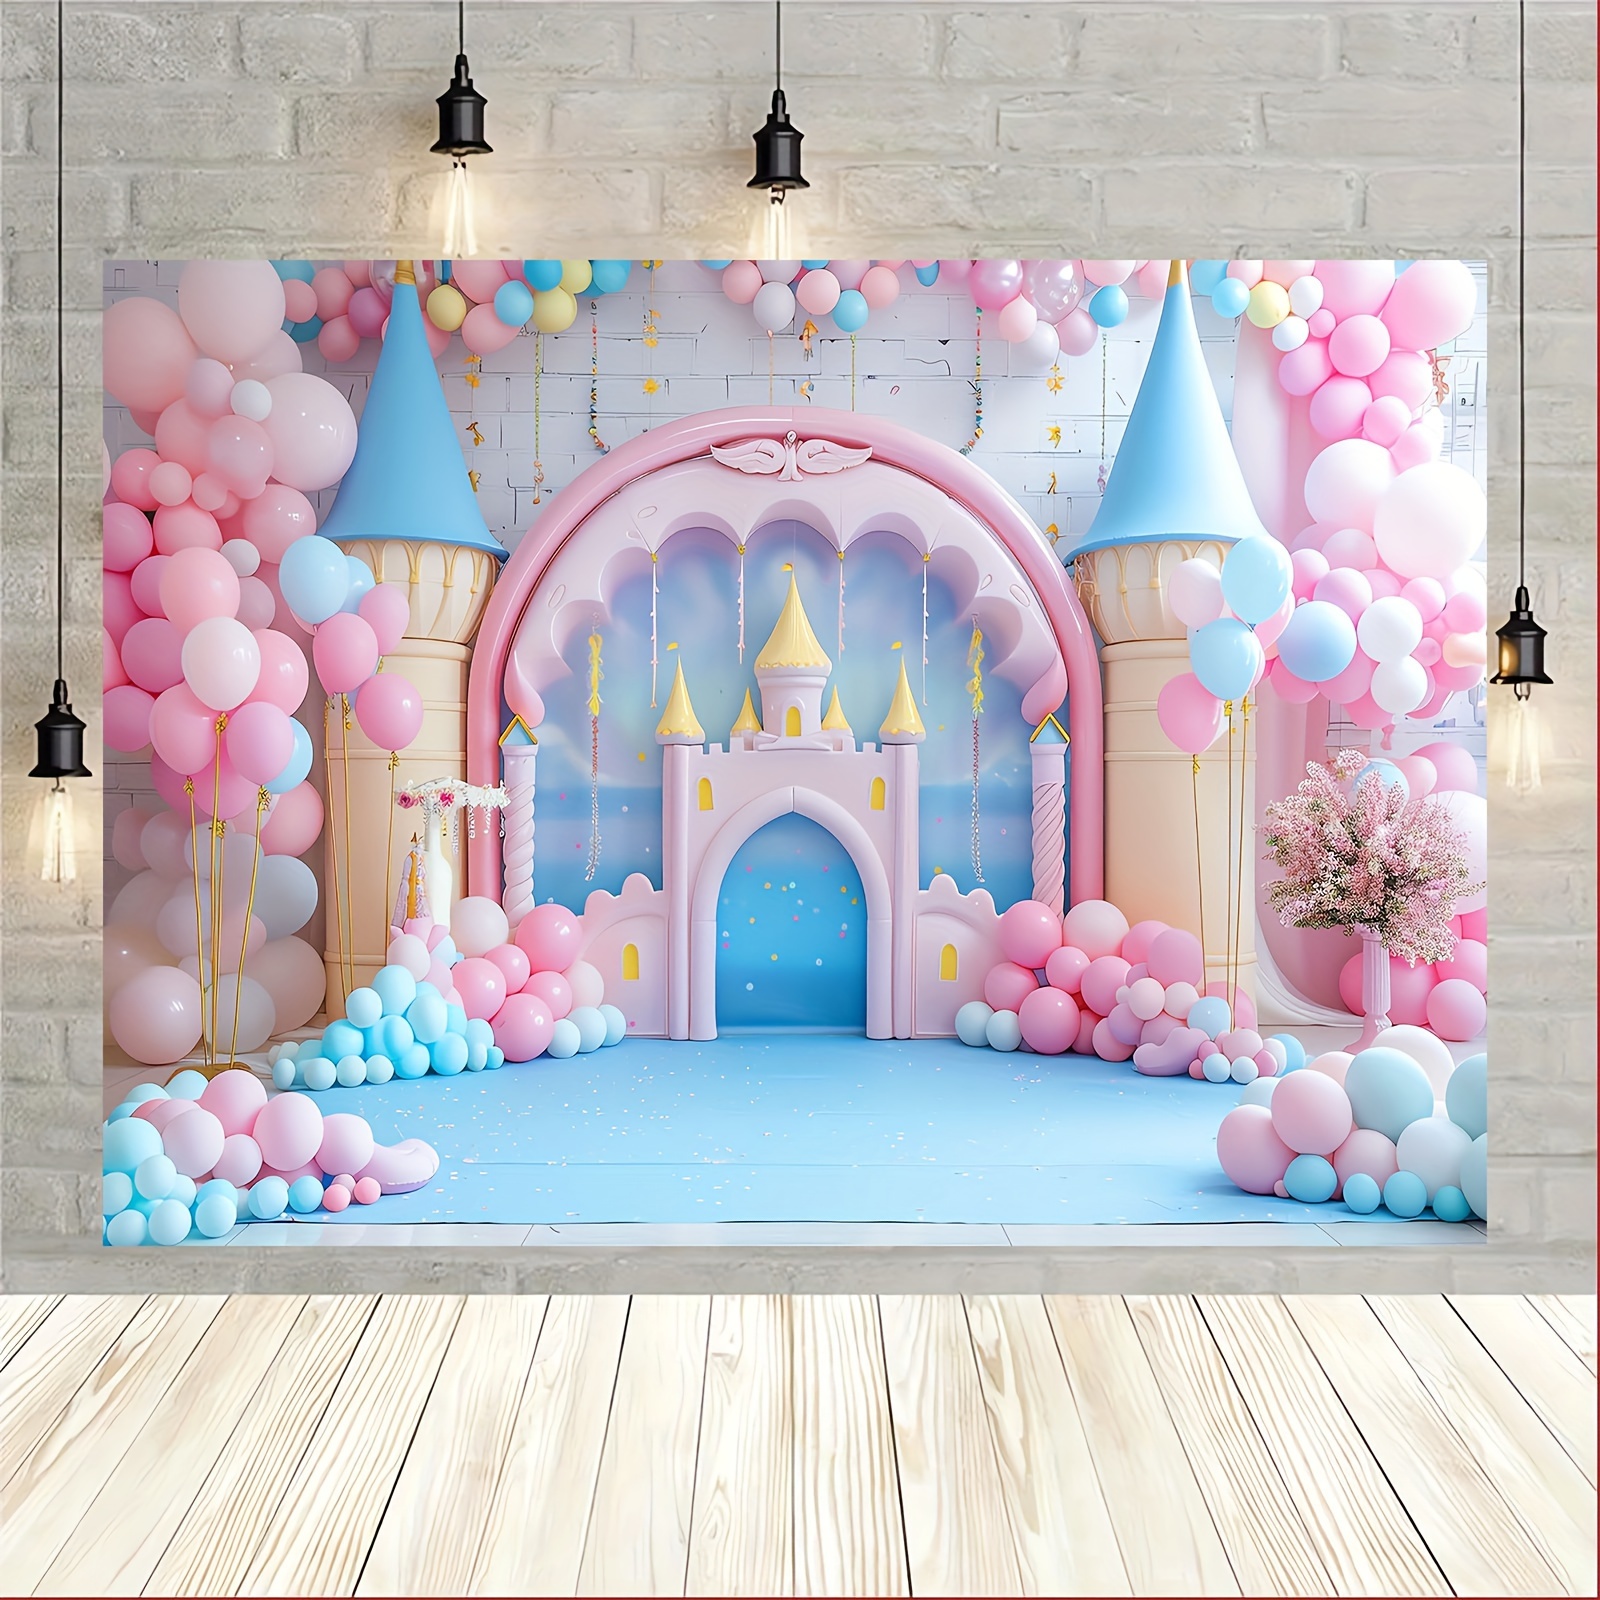 

Fairy Tale Castle & Balloon Photography Backdrop - Versatile Polyester Background For Birthdays, Weddings, Showers | Spring/summer Theme